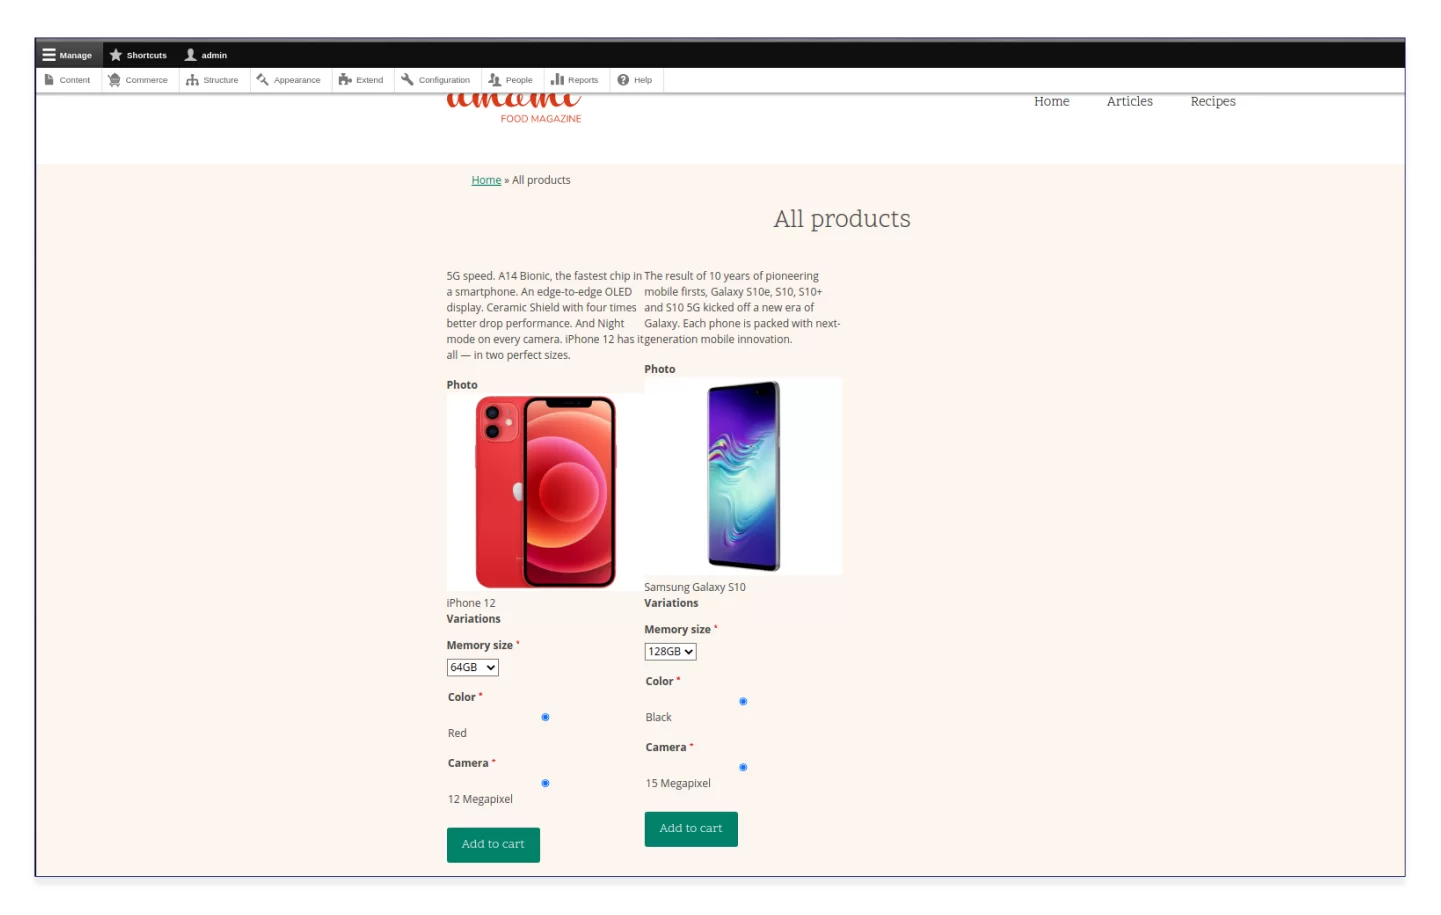 Product page 2